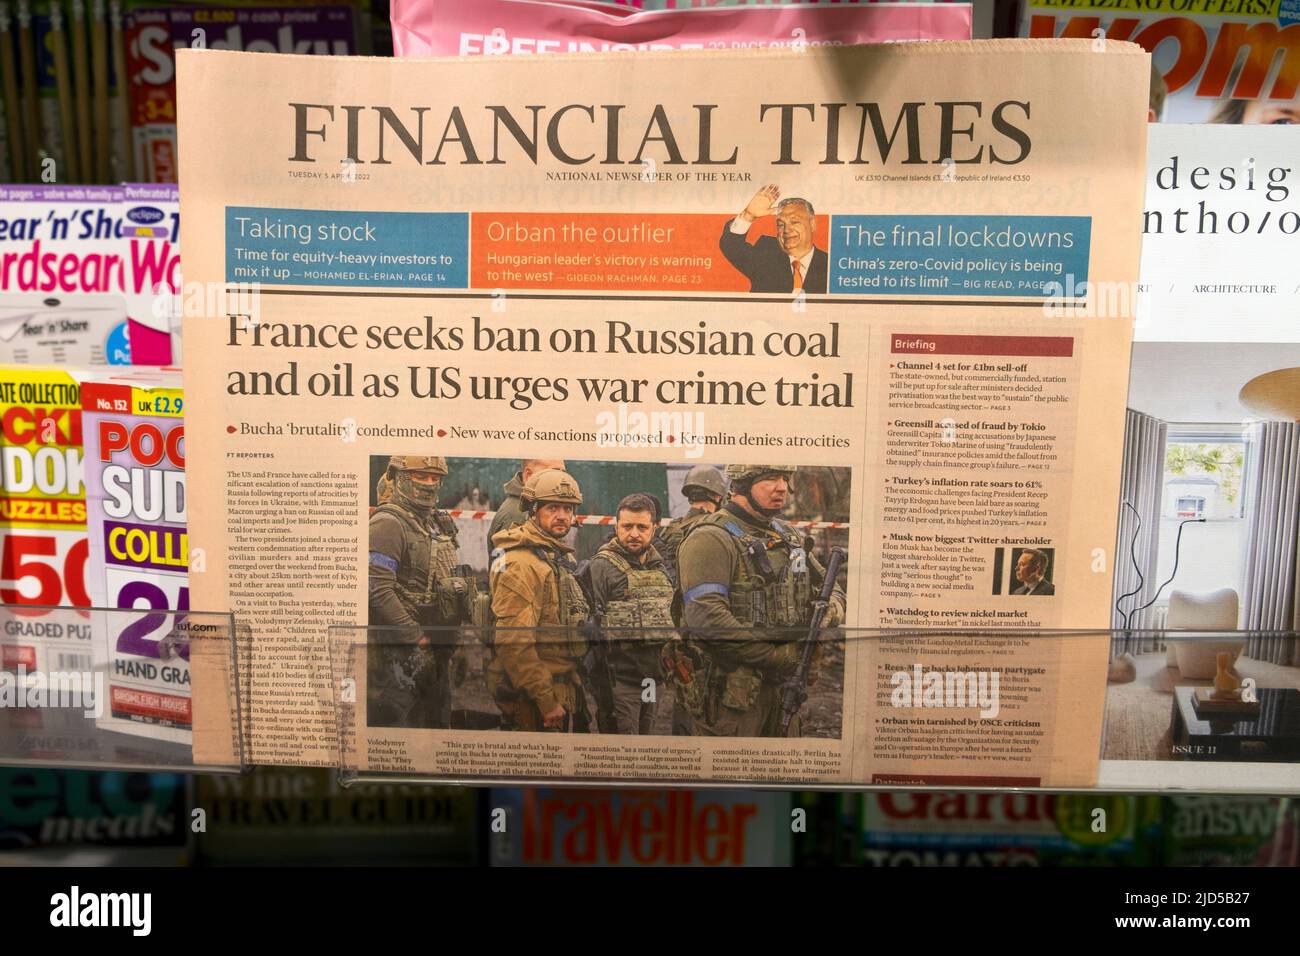 'France seeks ban on Russian coal and oil as US urges war crime trial' FT Financial Times newspaper headline  front page 5 April 2022 London UK Stock Photo